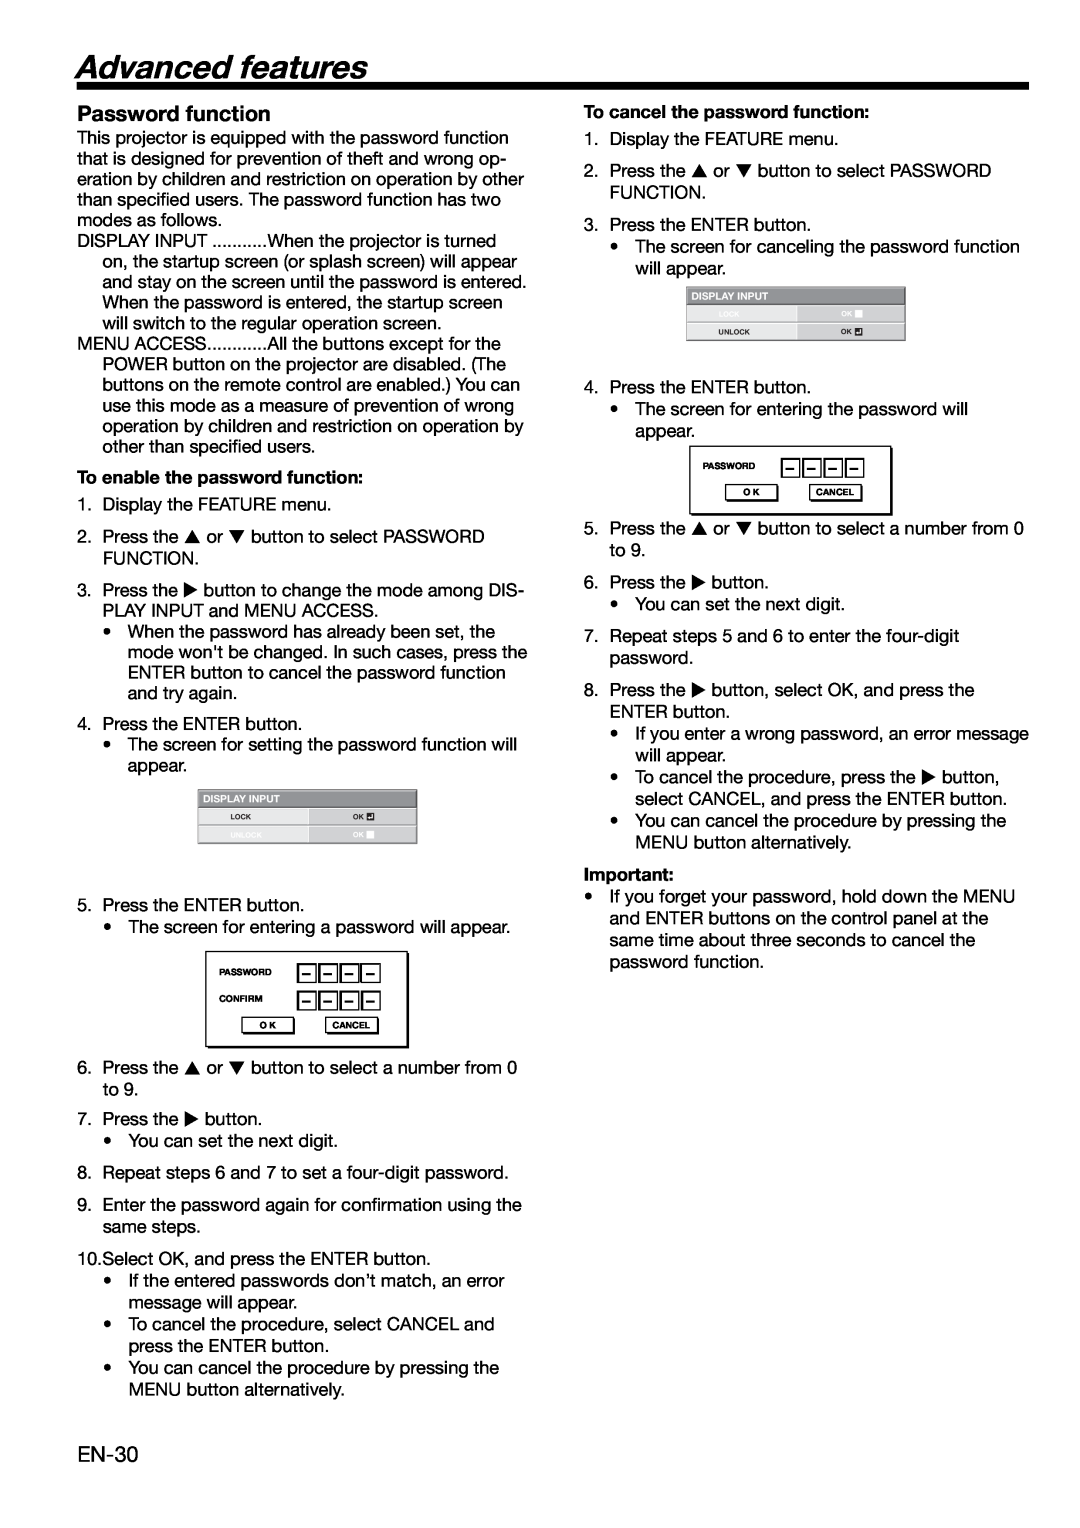 Mitsubishi Electronics HC3000 user manual Advanced features, Password function, To enable the password function 